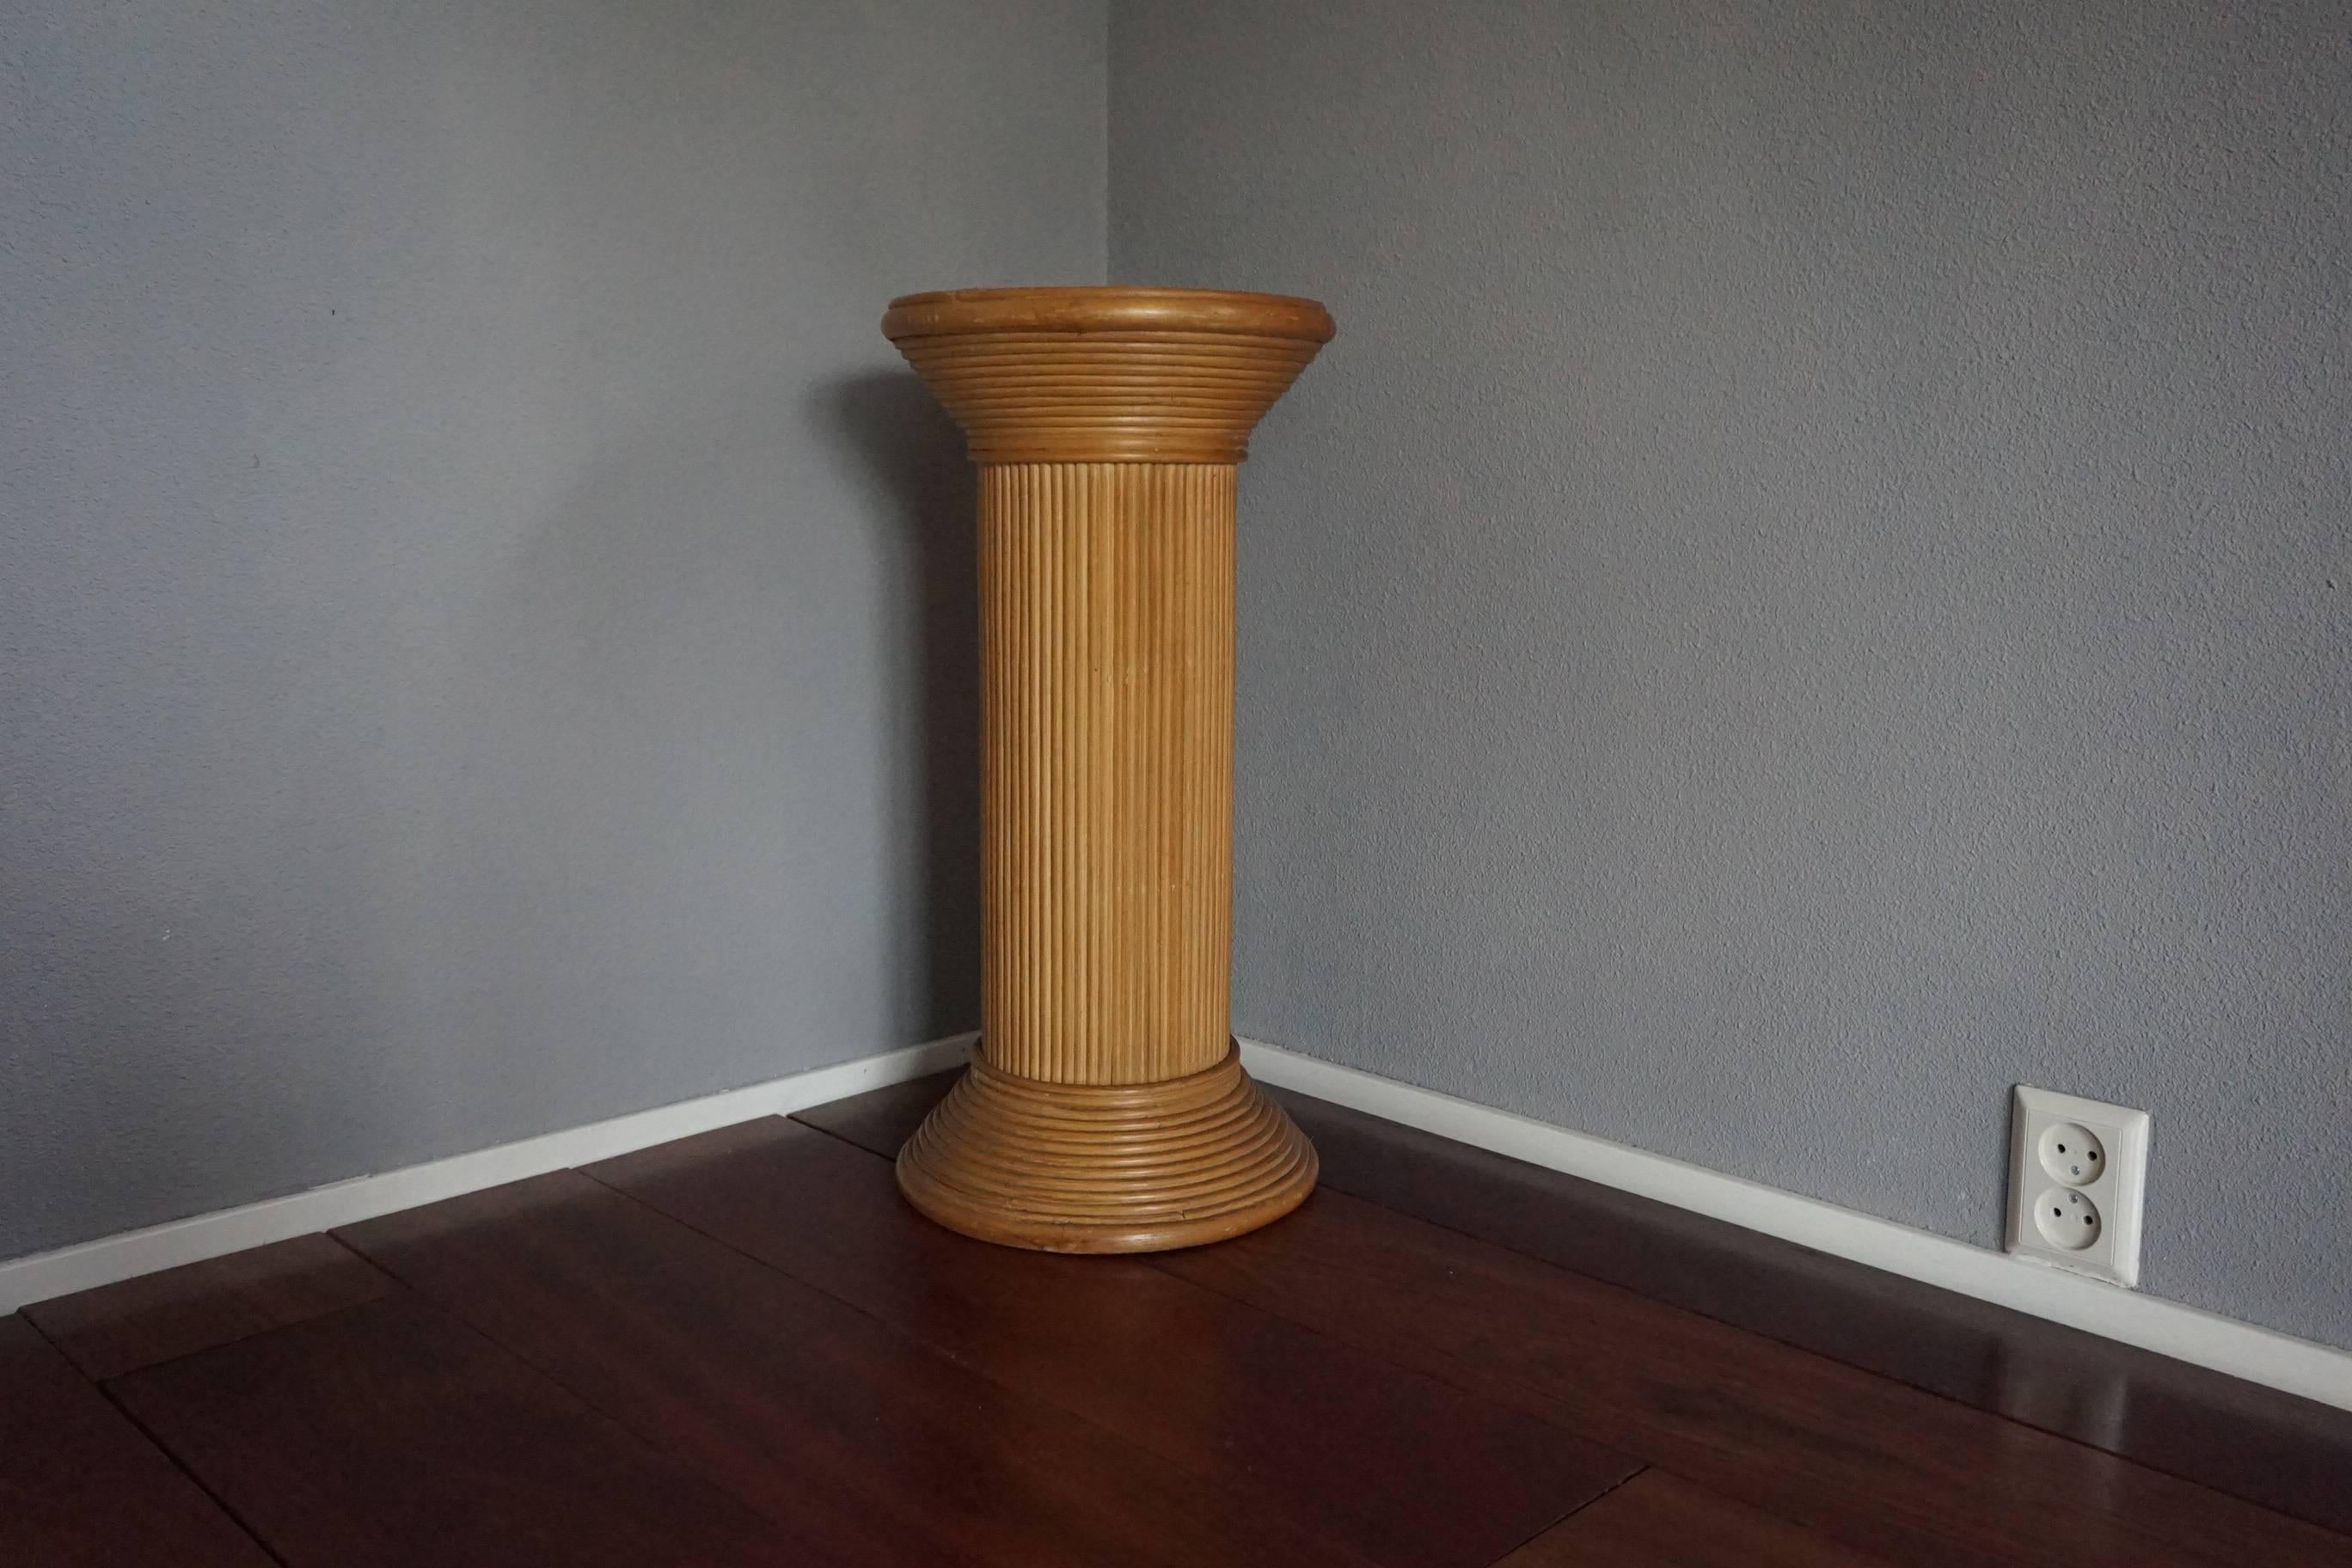 Vintage rattan on wood, 1970's pedestal stand.

Pedestals from certain era's and from certain materials are very hard to find and this mid to late 20th century rattan pedestal is such a rare find. Apart from truly minor imperfections this wonderful